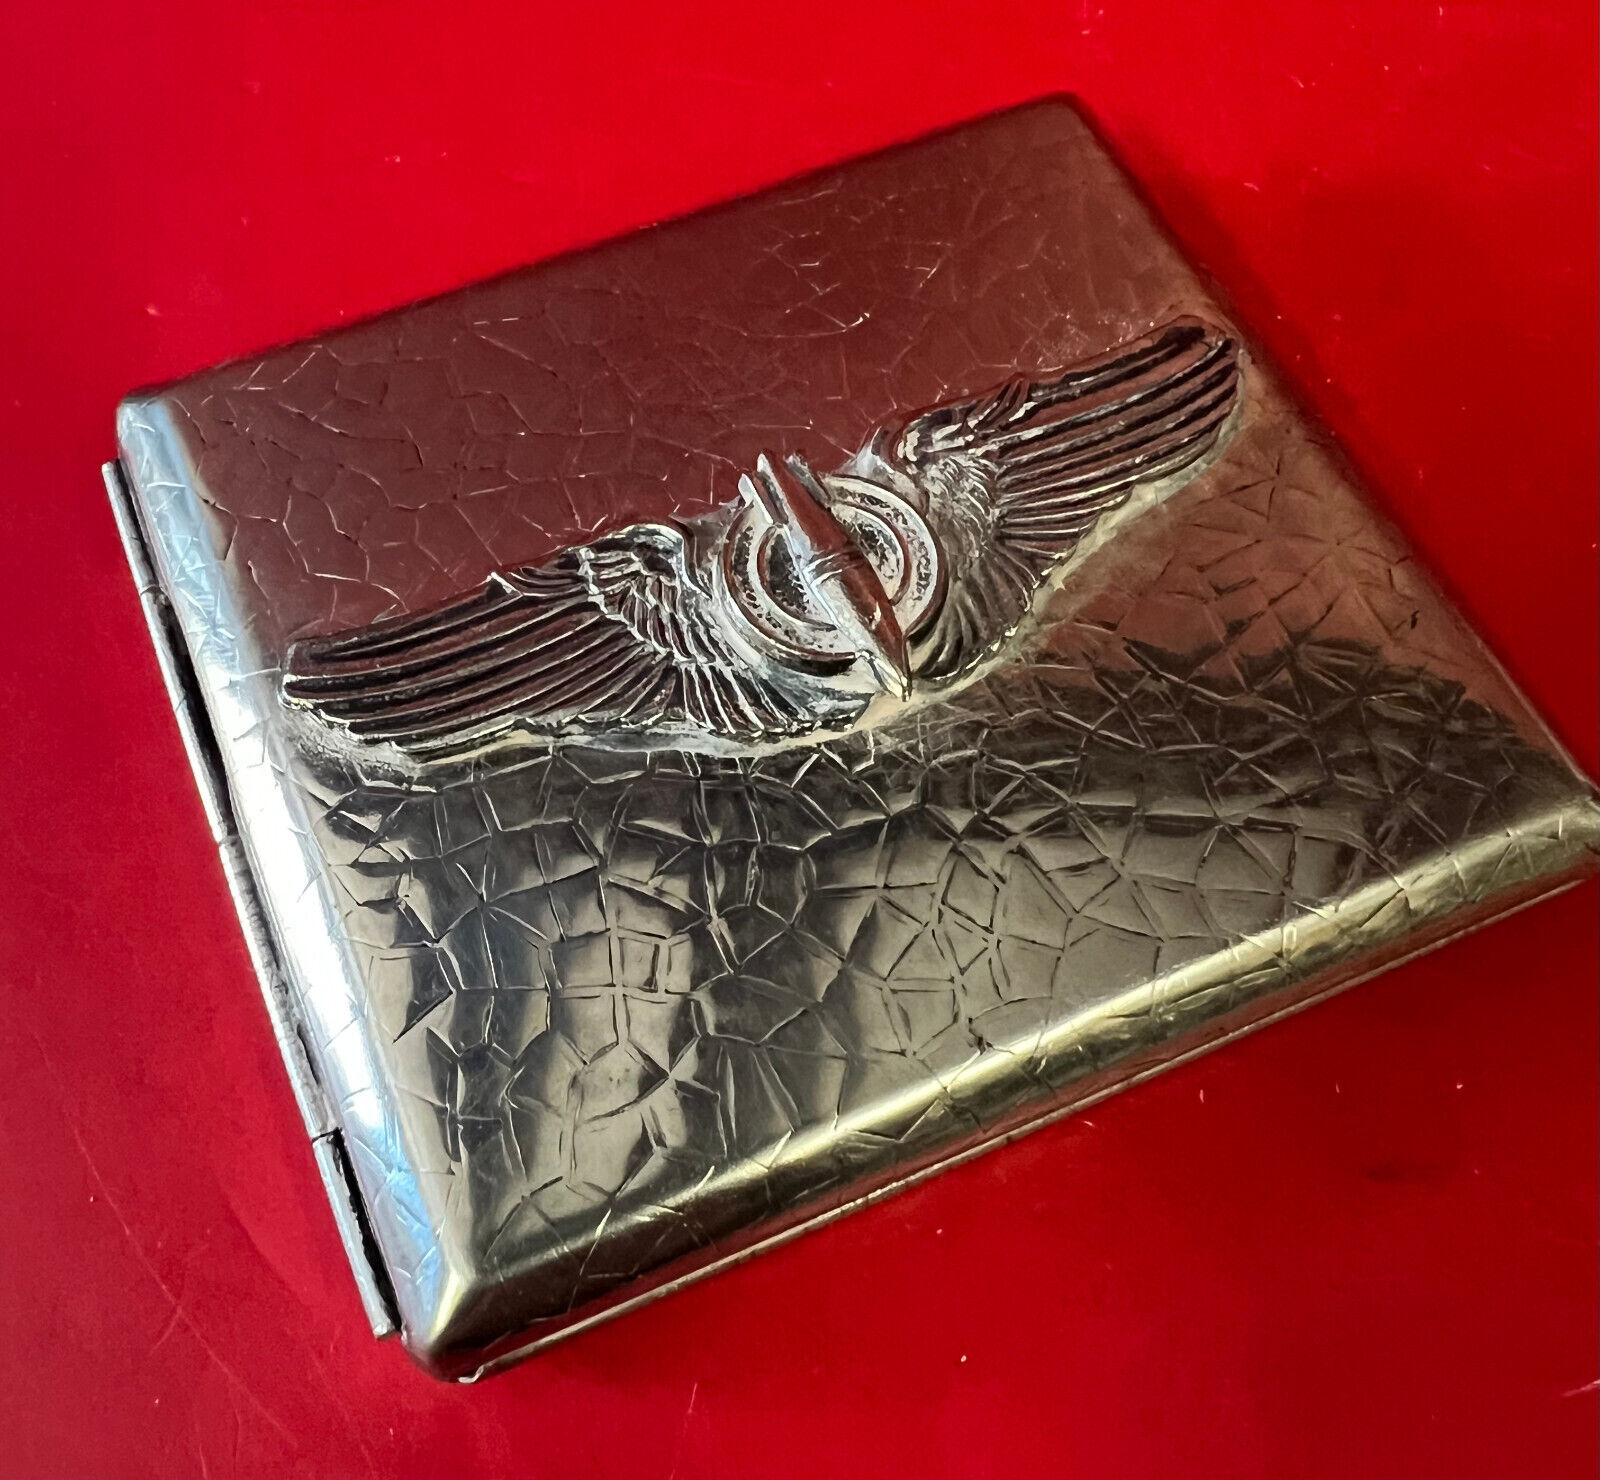 ARMY AIR FORCES BOMBARDIER’S CIGARETTE CASE